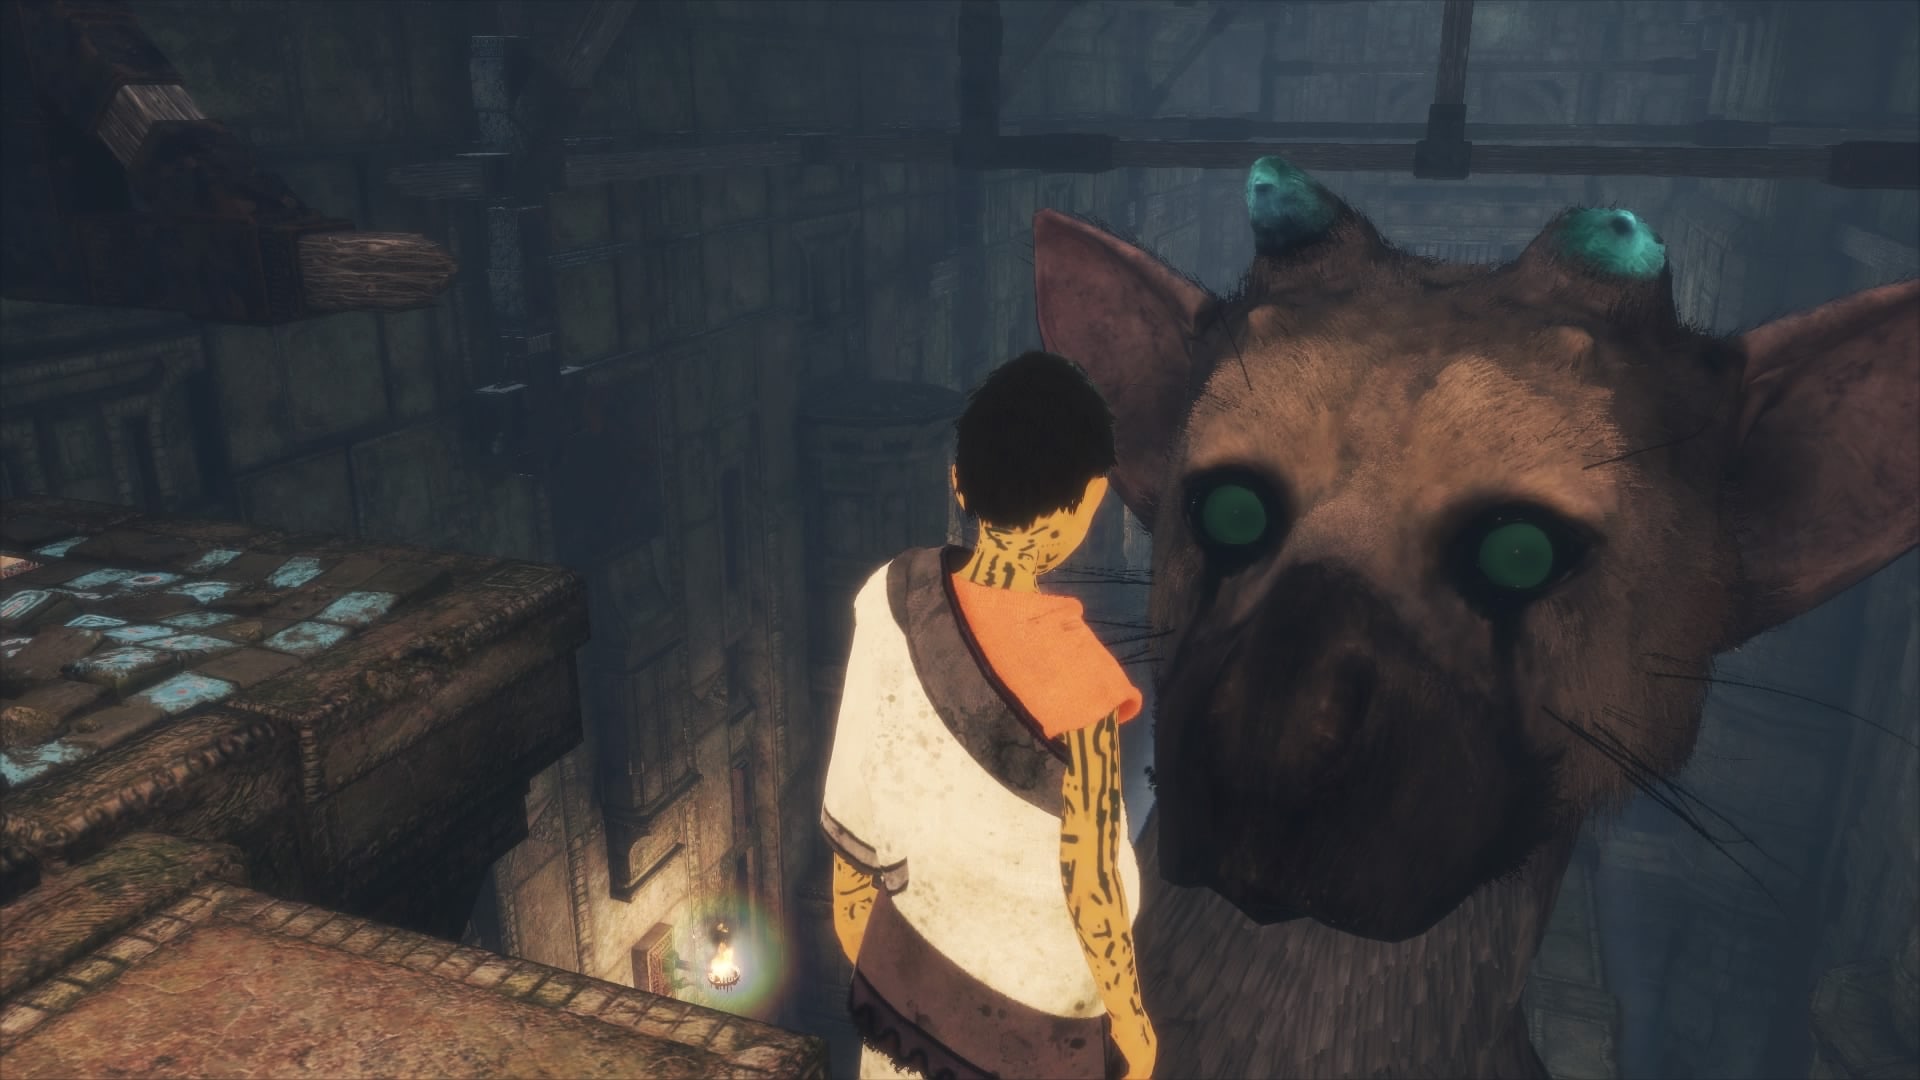 Torgo's Review of The Last Guardian